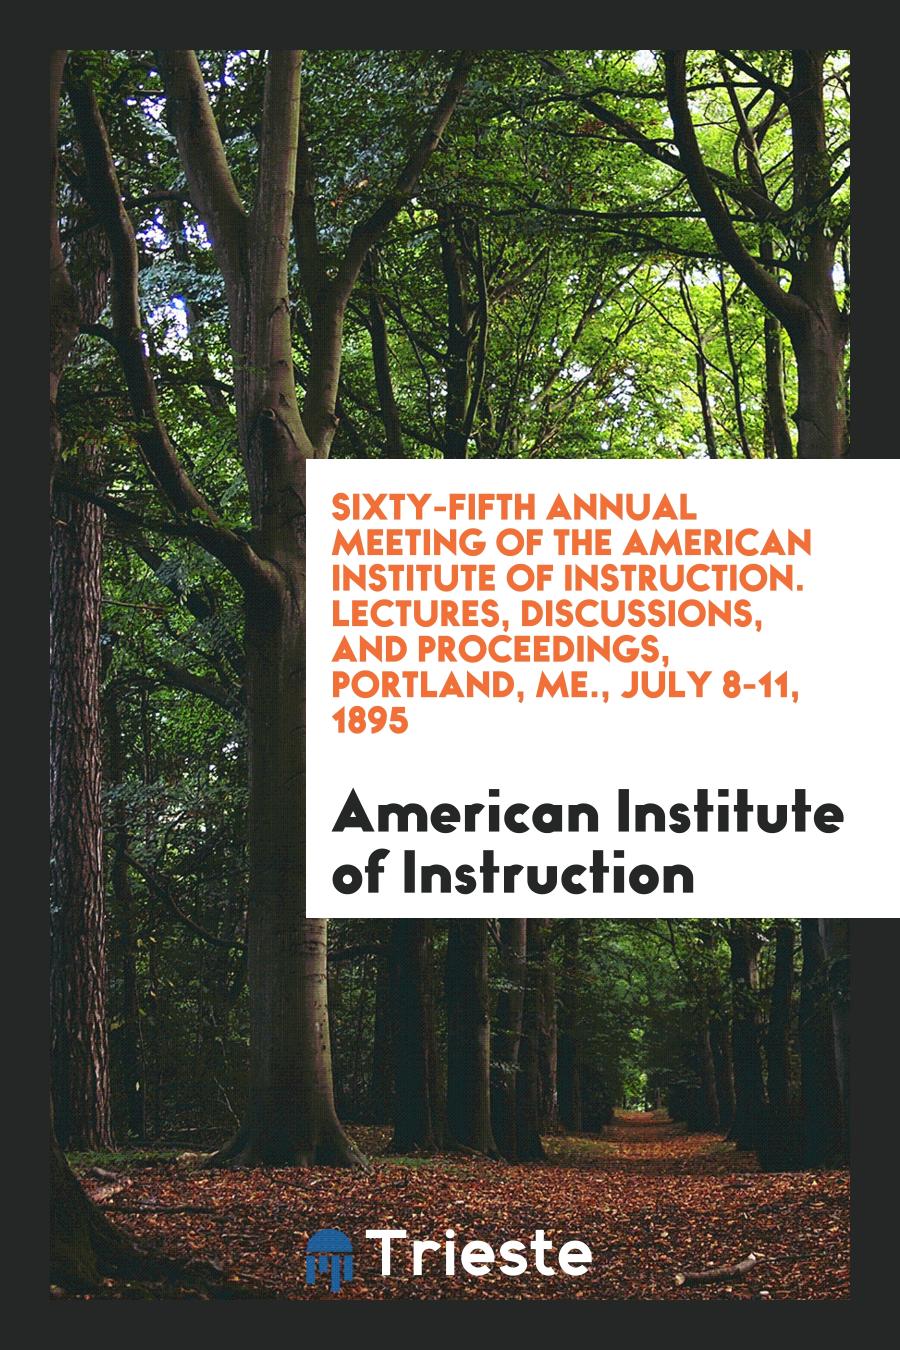 Sixty-Fifth Annual Meeting of the American Institute of Instruction. Lectures, Discussions, and Proceedings, Portland, ME., July 8-11, 1895